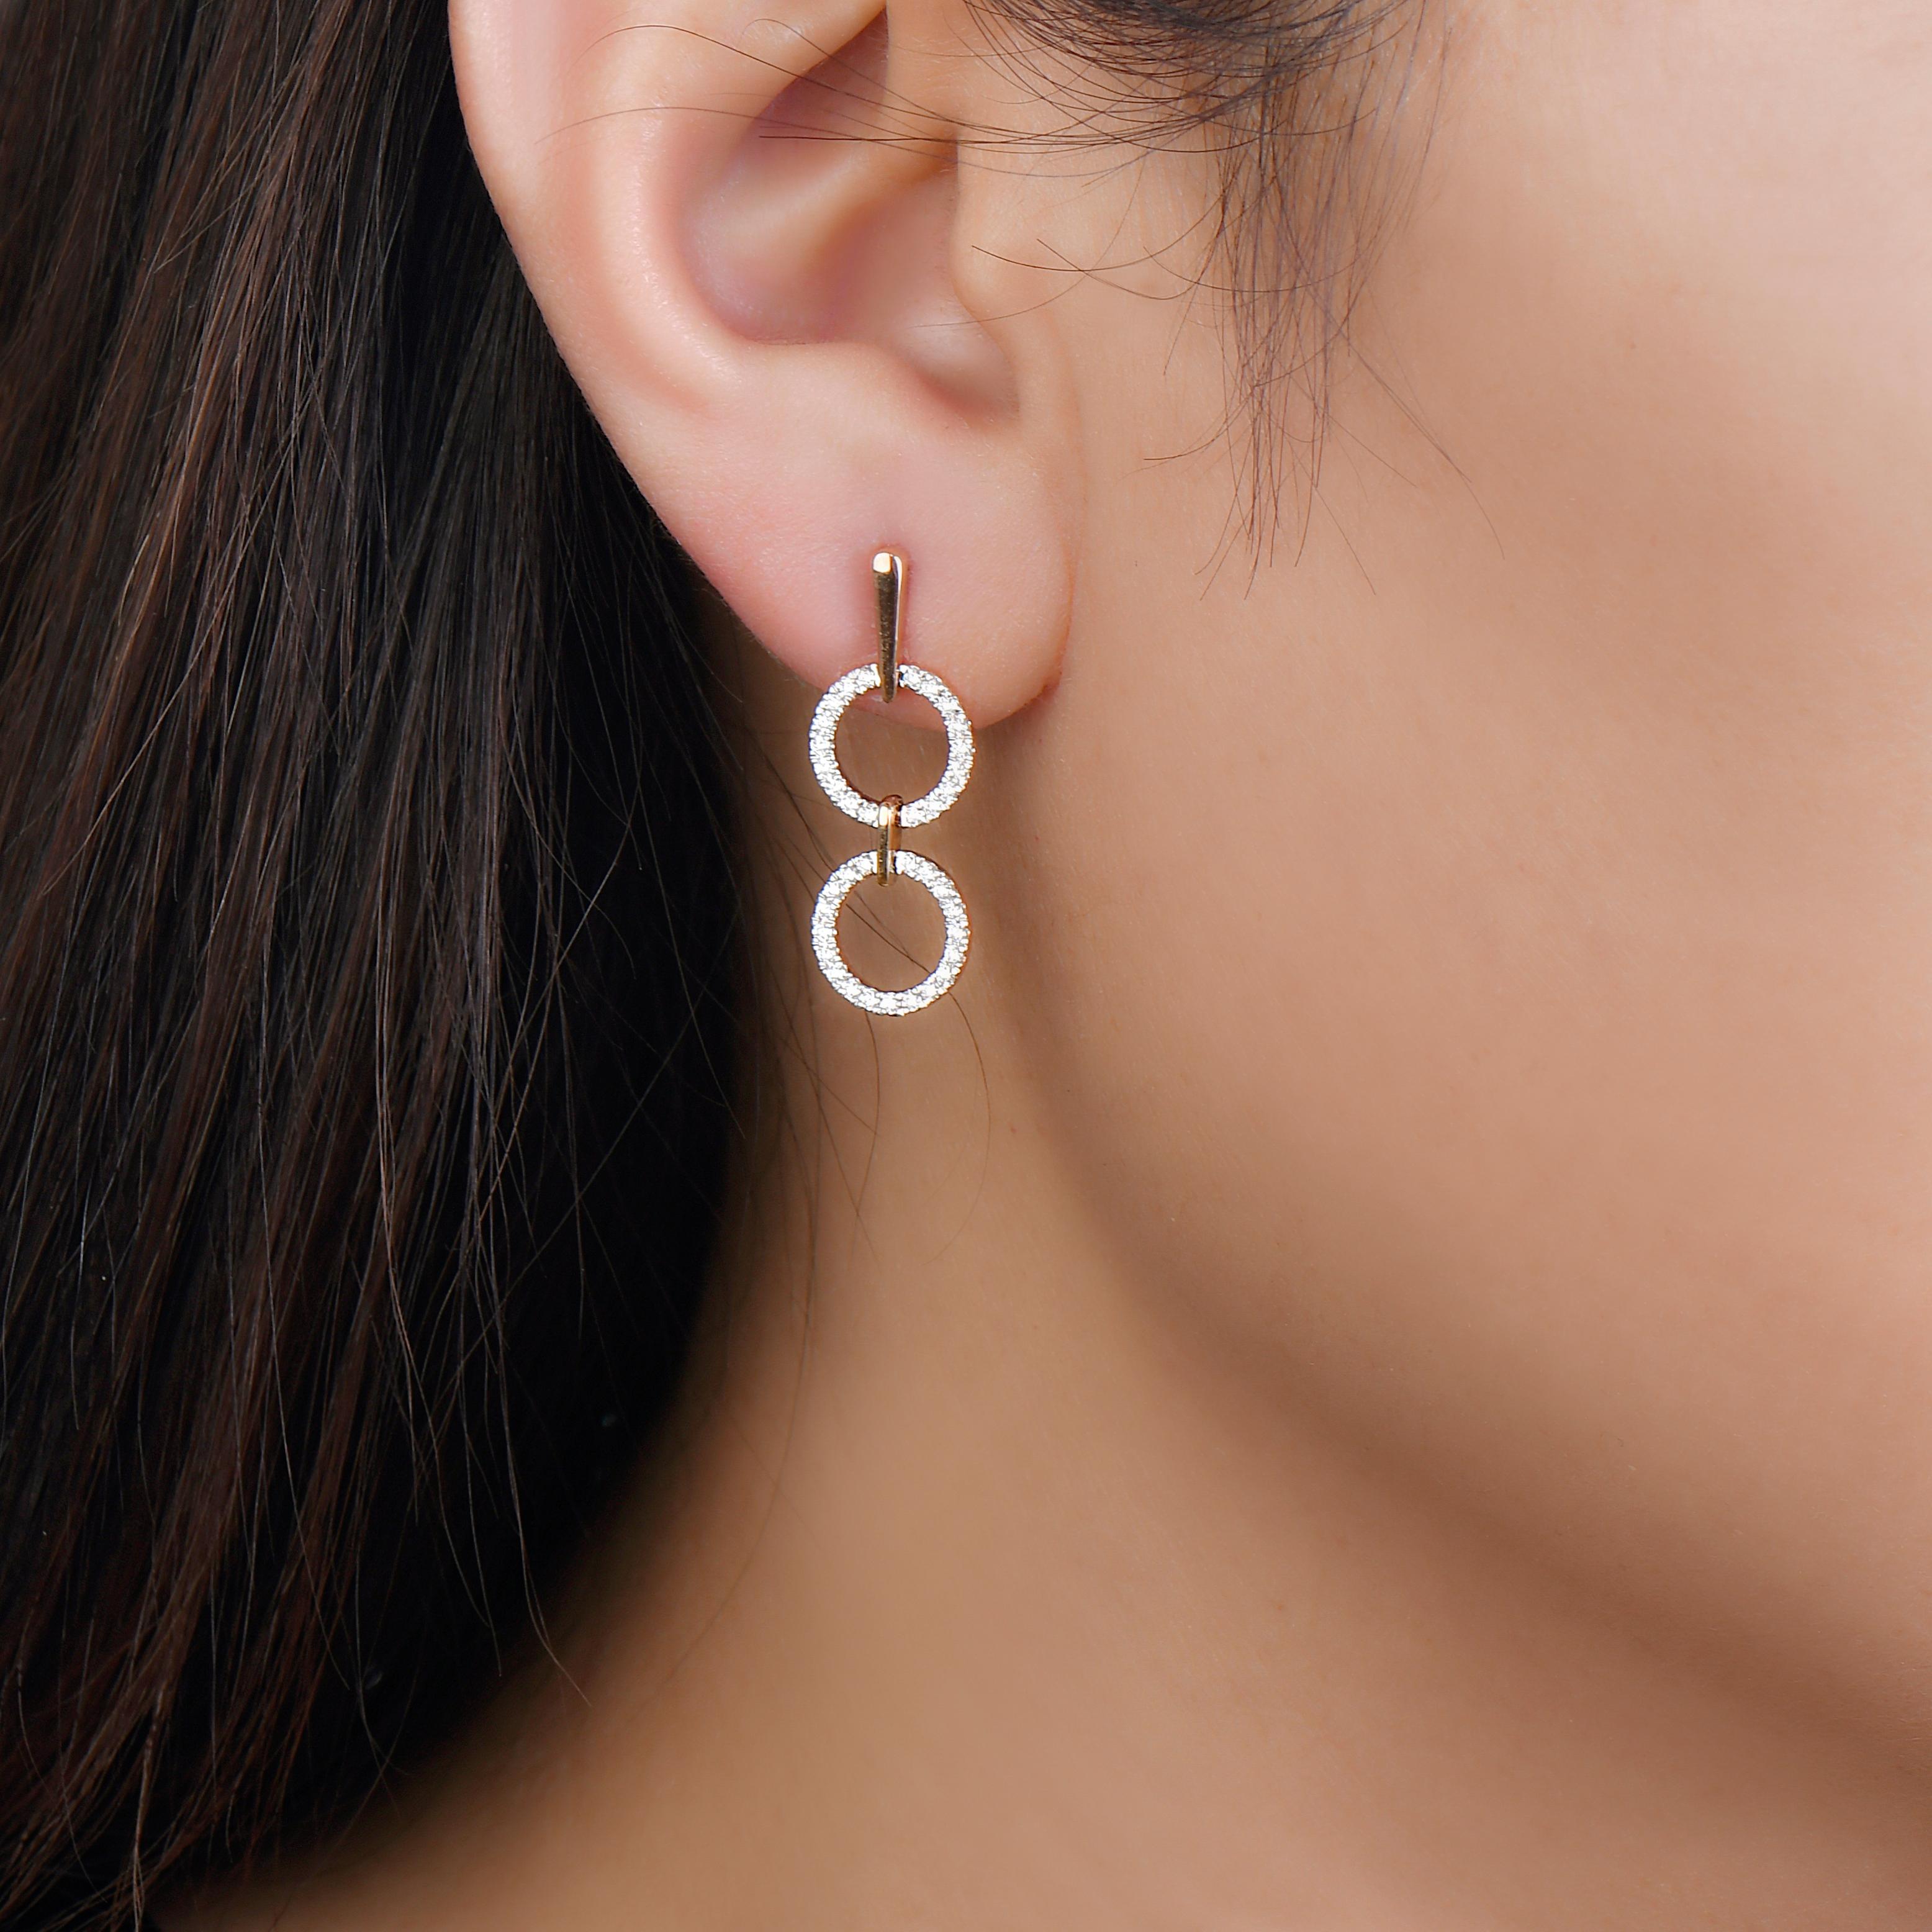 A different take on dangling earrings, these geo art earrings have more of a hang than a dangle. However, that does not make them any less stunning. The diamond dangling earrings in 14K rose gold are perfect to gift someone you share a special